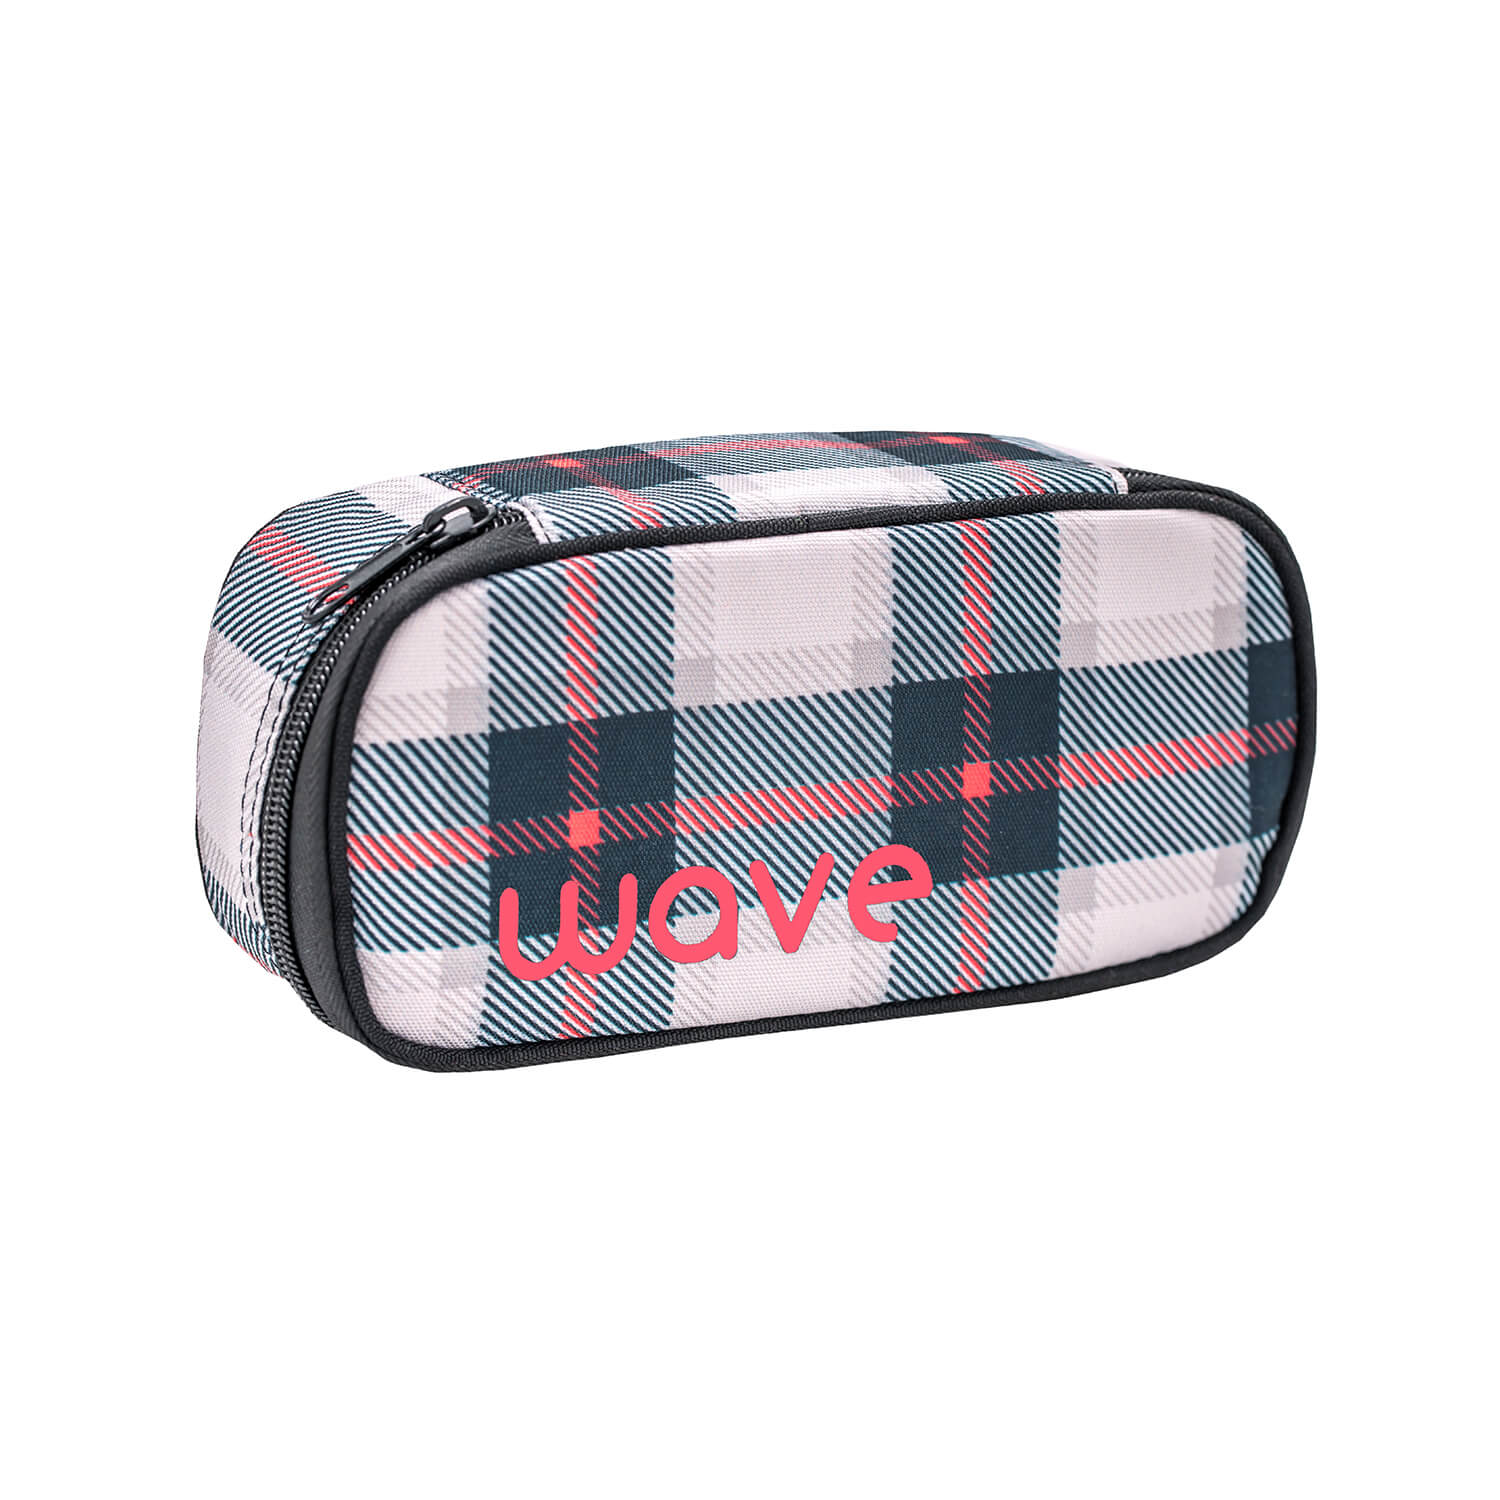 WAVE pencil pouch Grey Red Pattern - Shadow with GRATIS pencil pouch